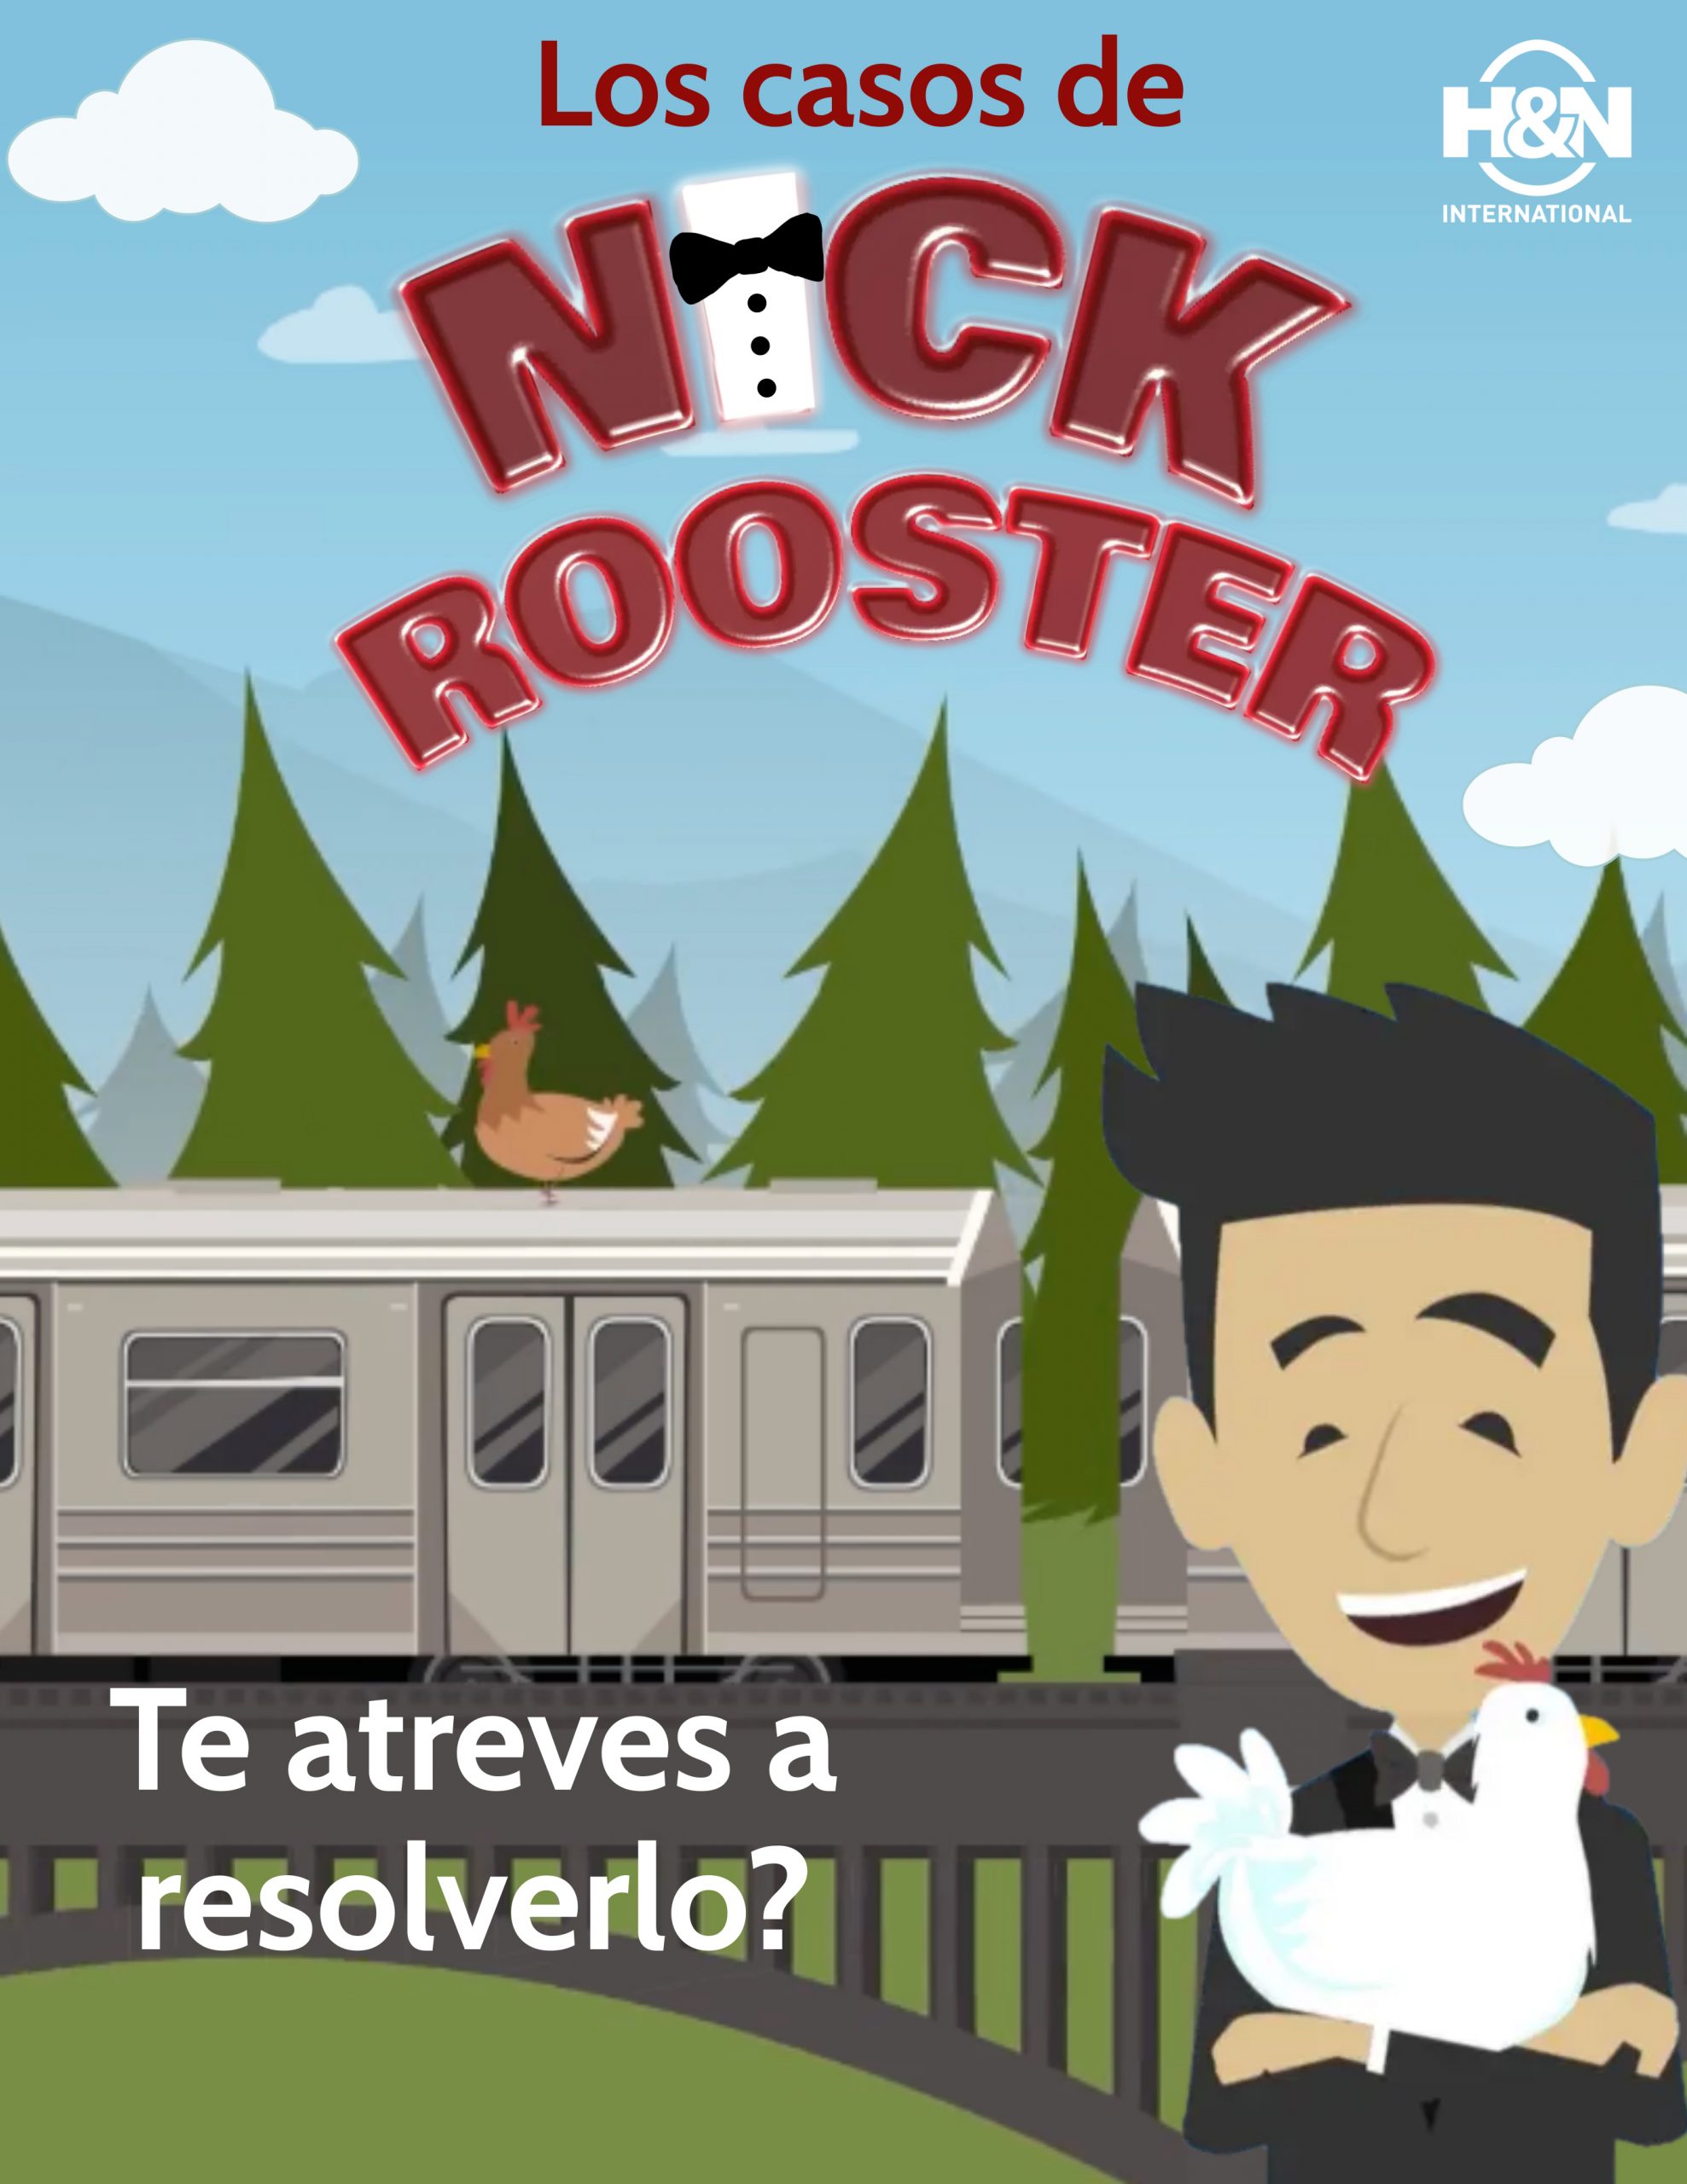 Nick Rooster caso num. 9